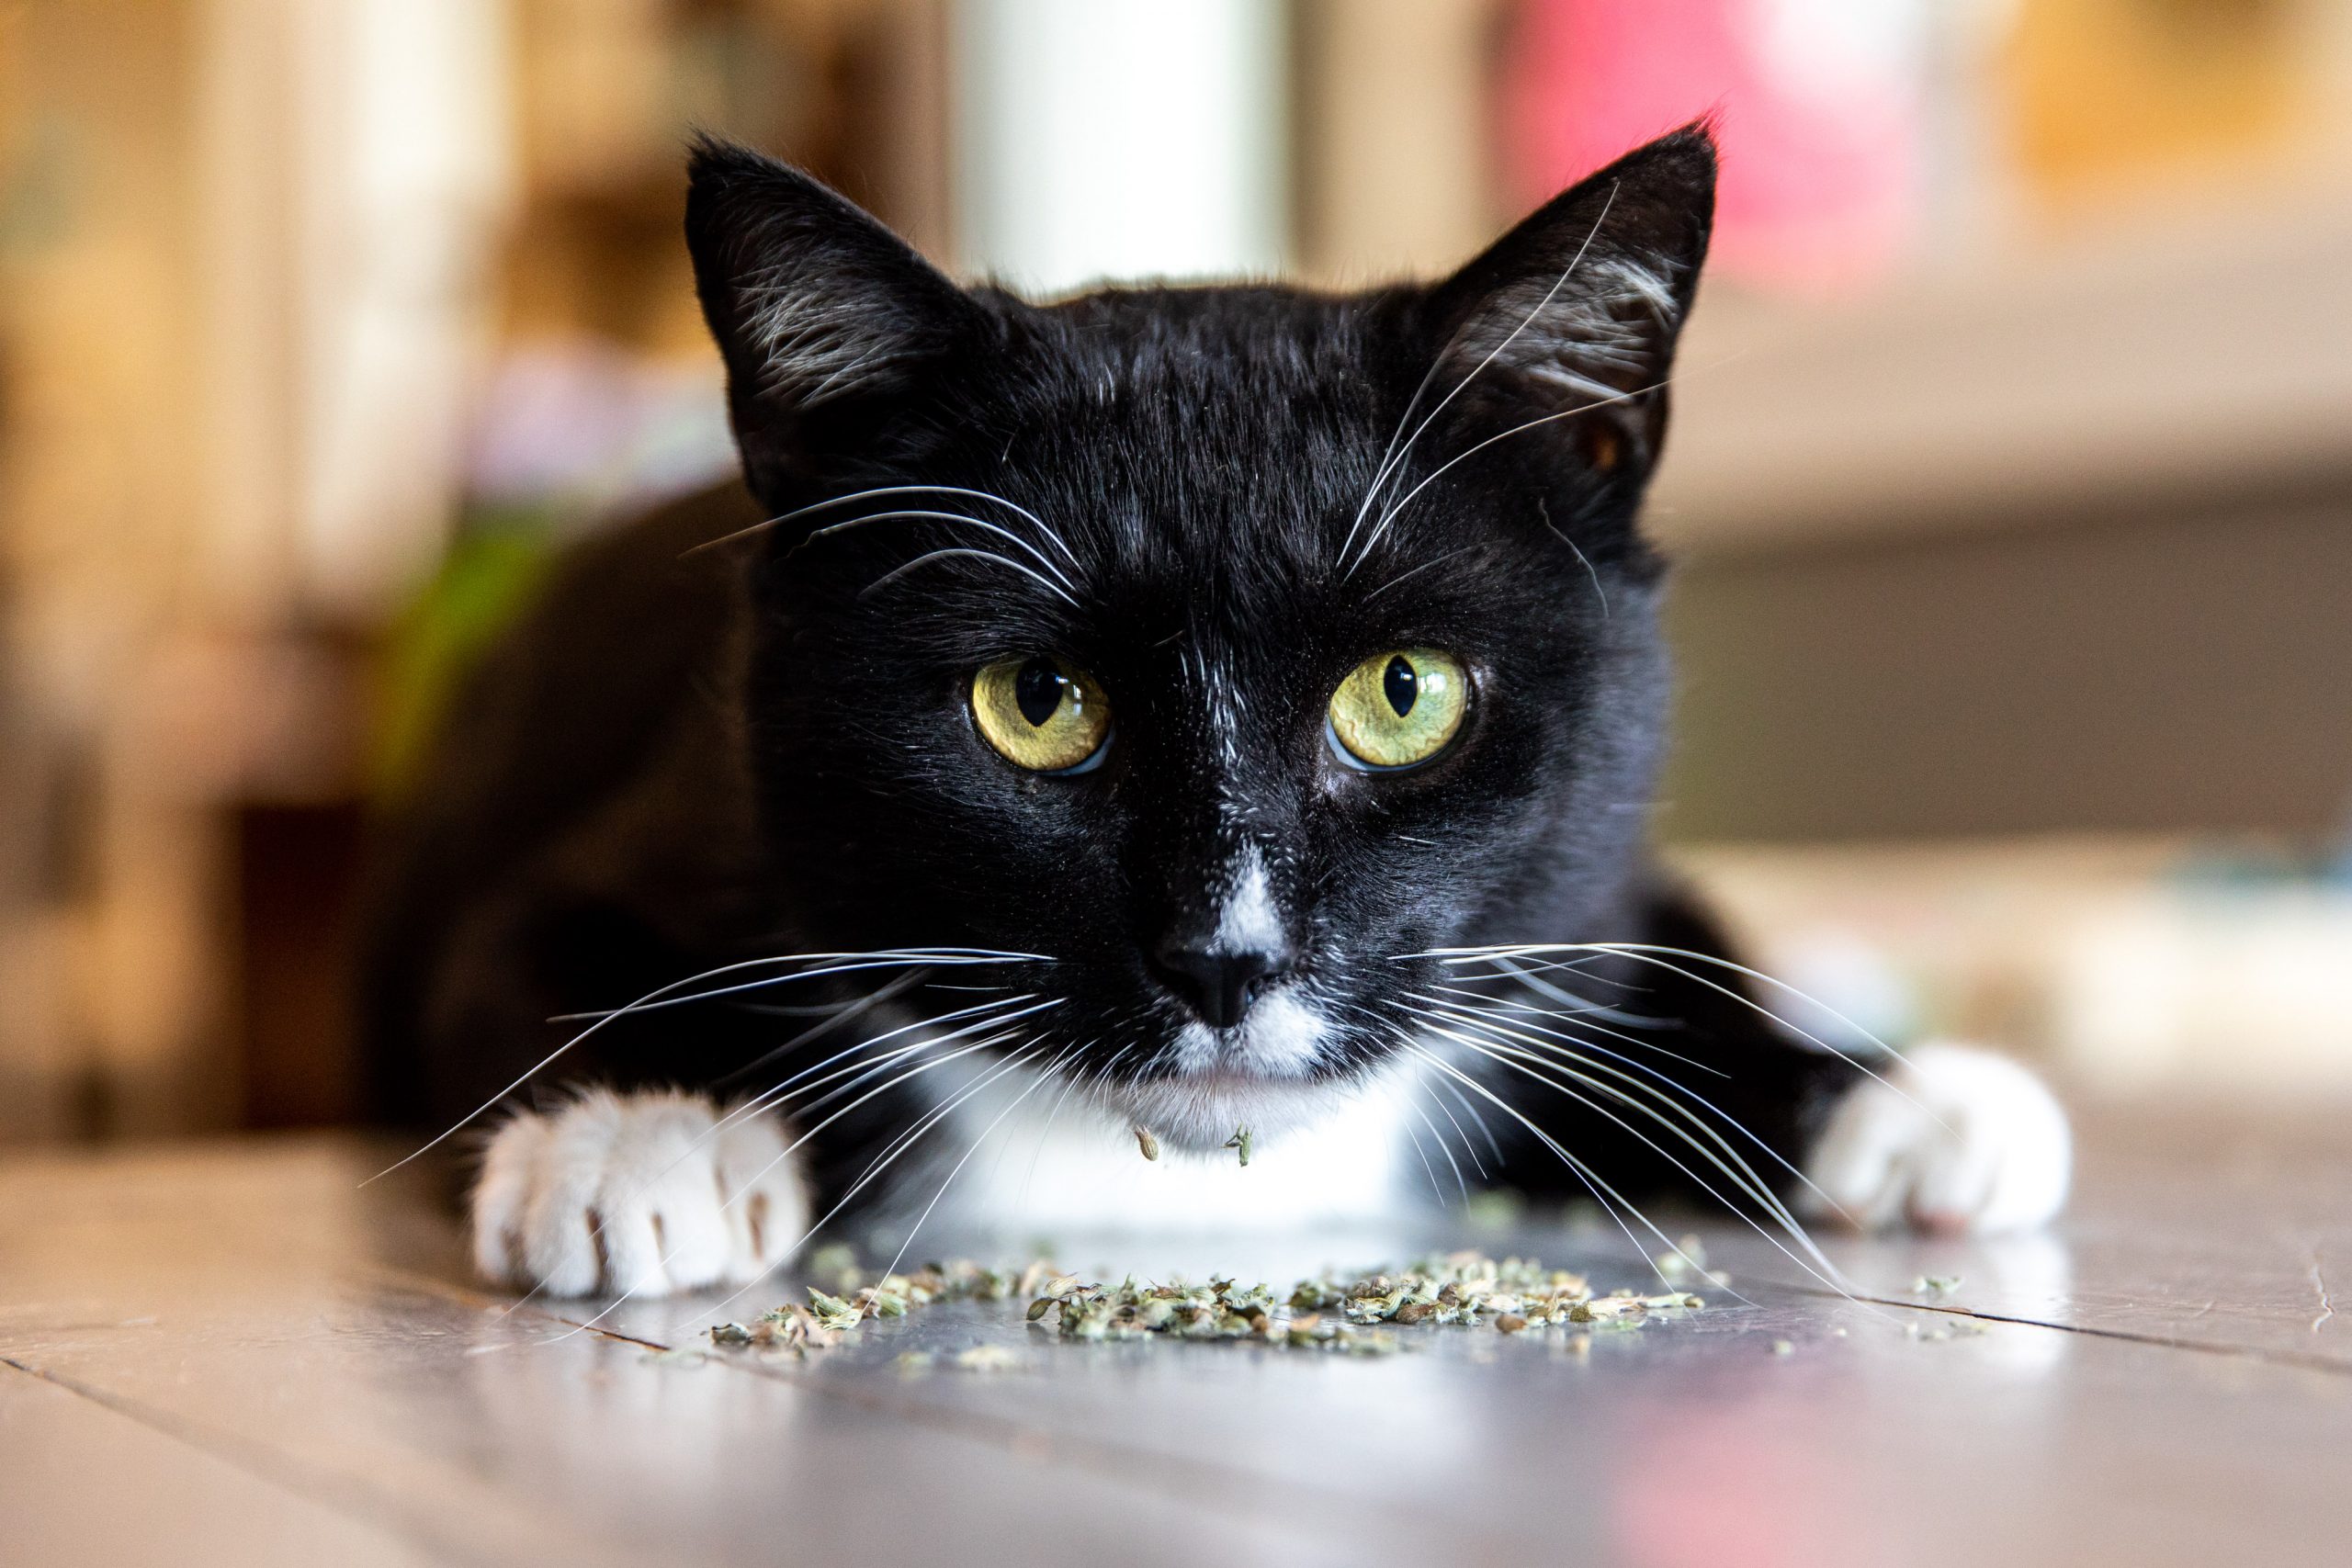 A black and white cat smelling catnip